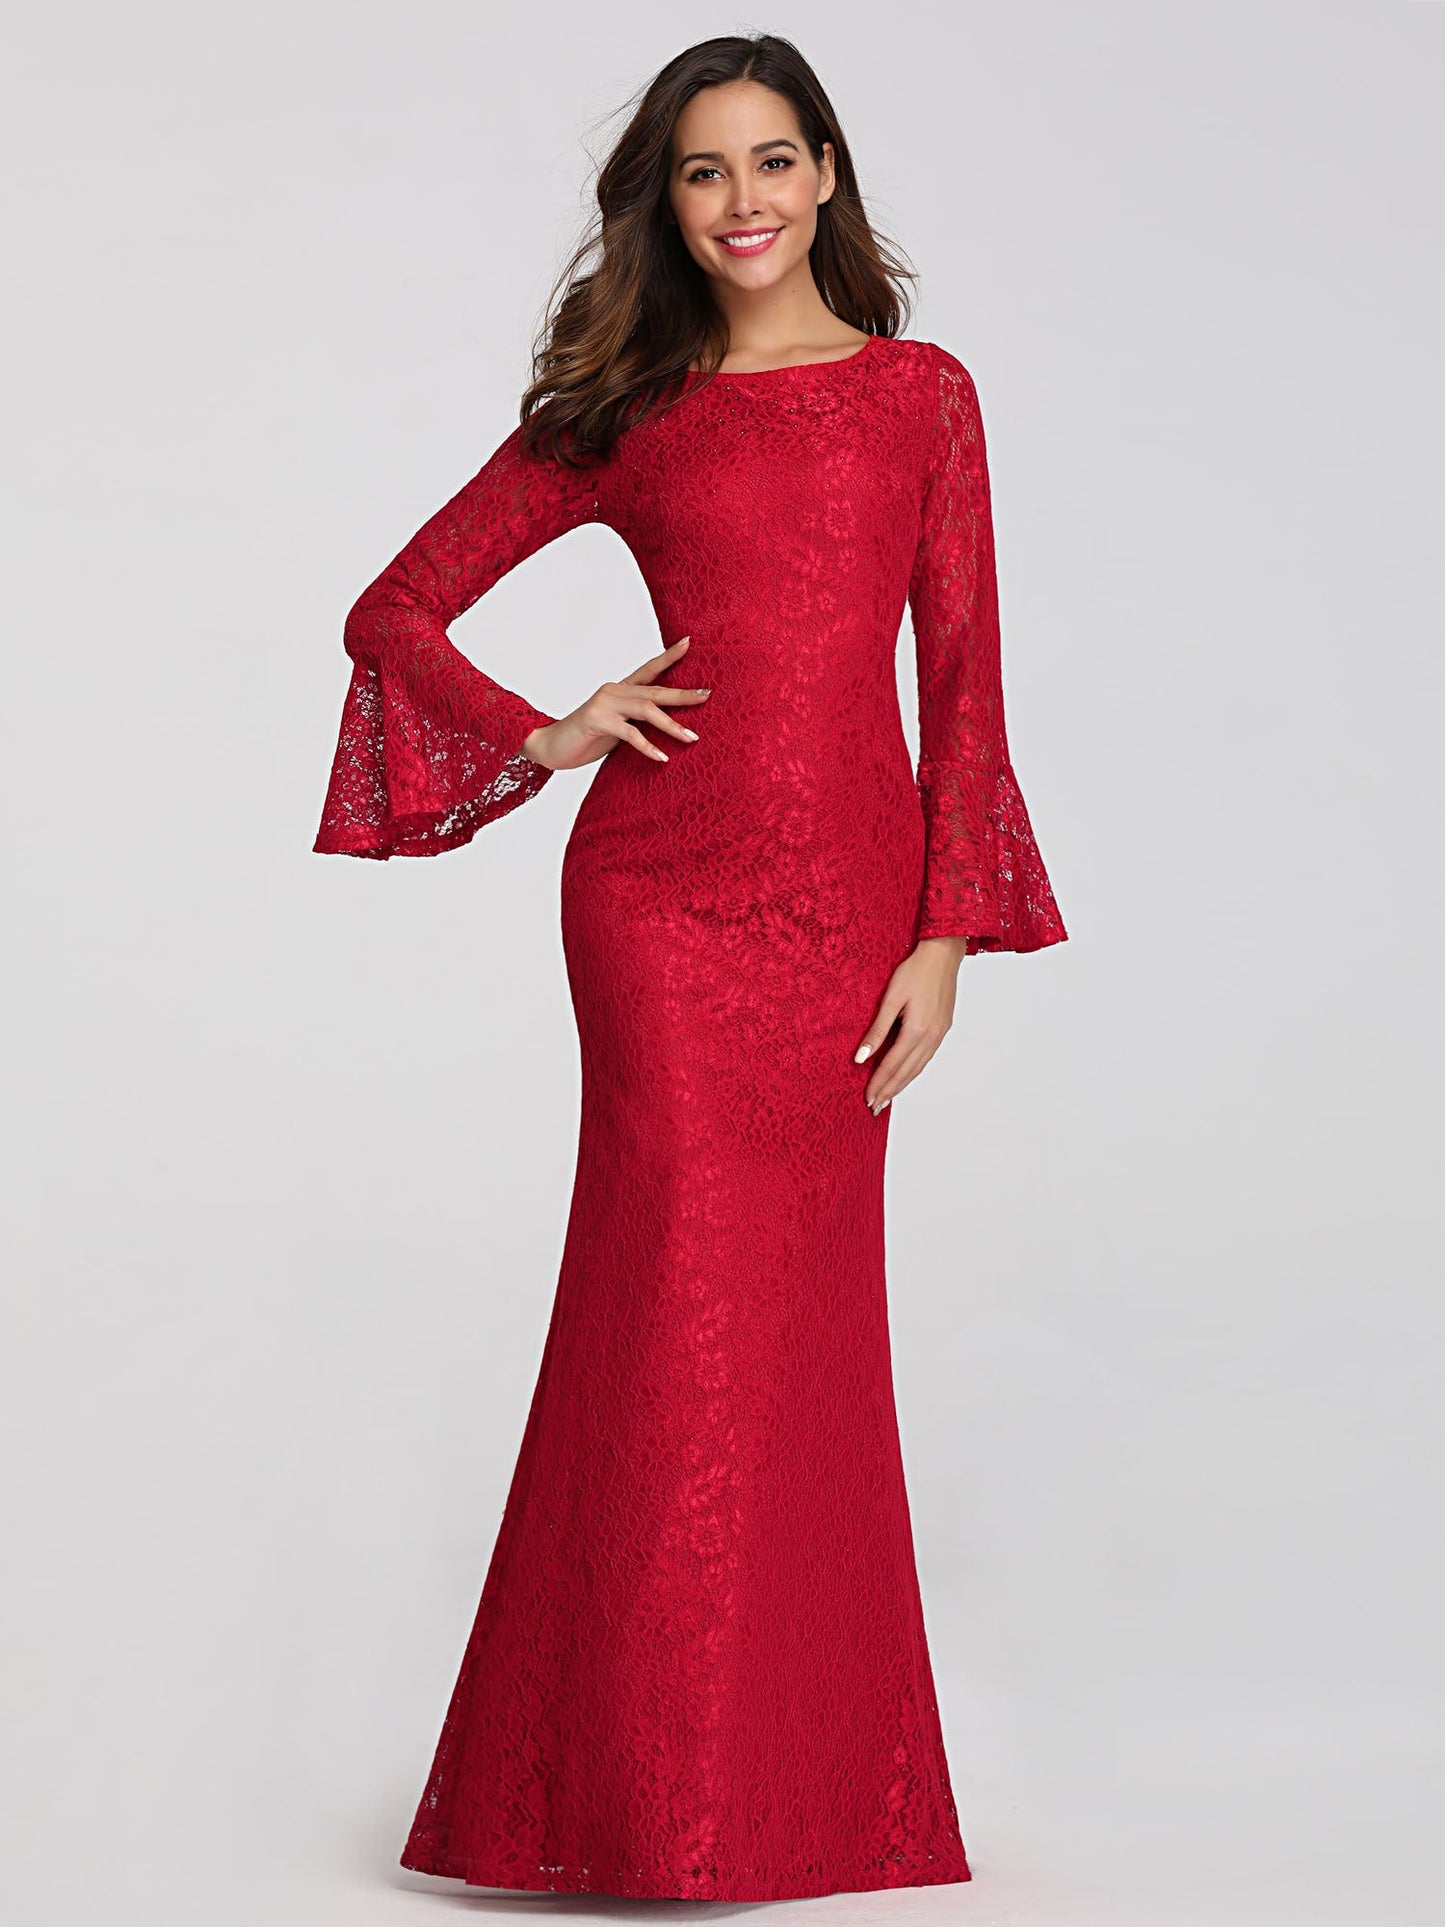 Wholesale Mermaid Evening Party Dresses with Long Flare Lace Sleeve